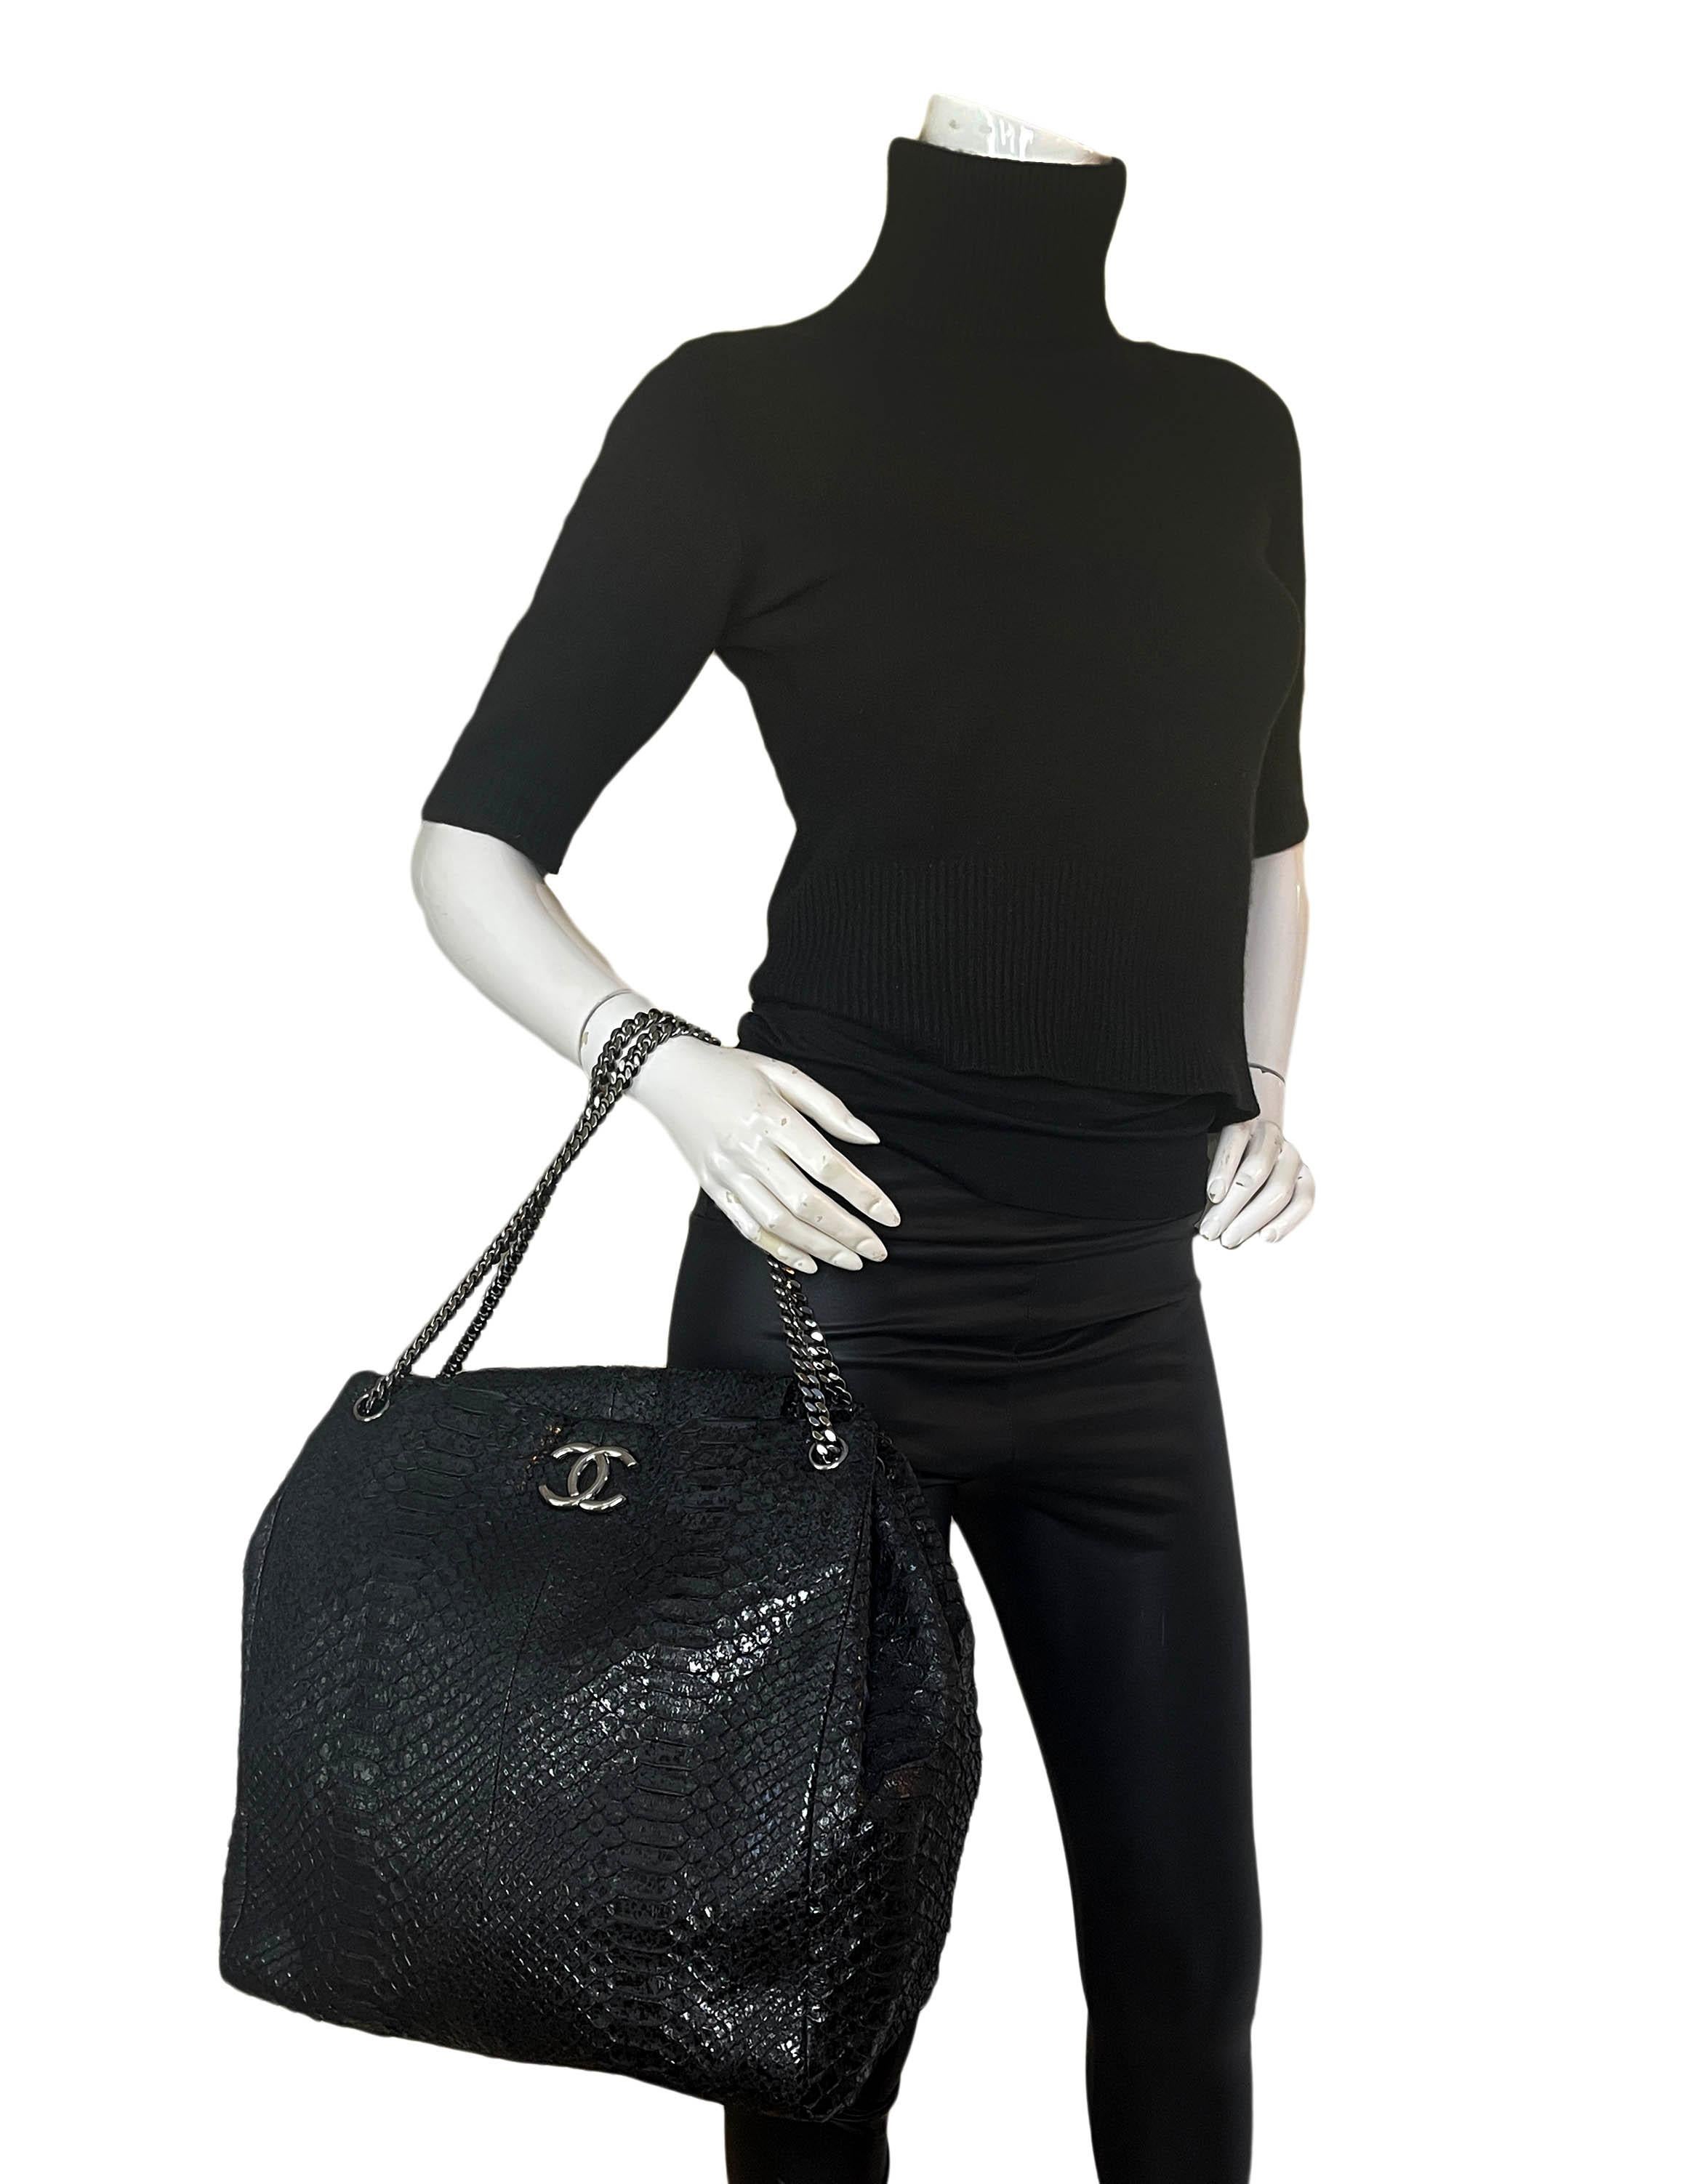 Chanel Black Python CC Accordion Large Chain Tote Bag

Made In: France
Year of Production: 2008
Color: Black
Hardware: Darkened silvertone
Materials: Python snakeskin
Lining: Black fine textile
Closure/Opening: Flap top with magnet
Exterior Pockets: